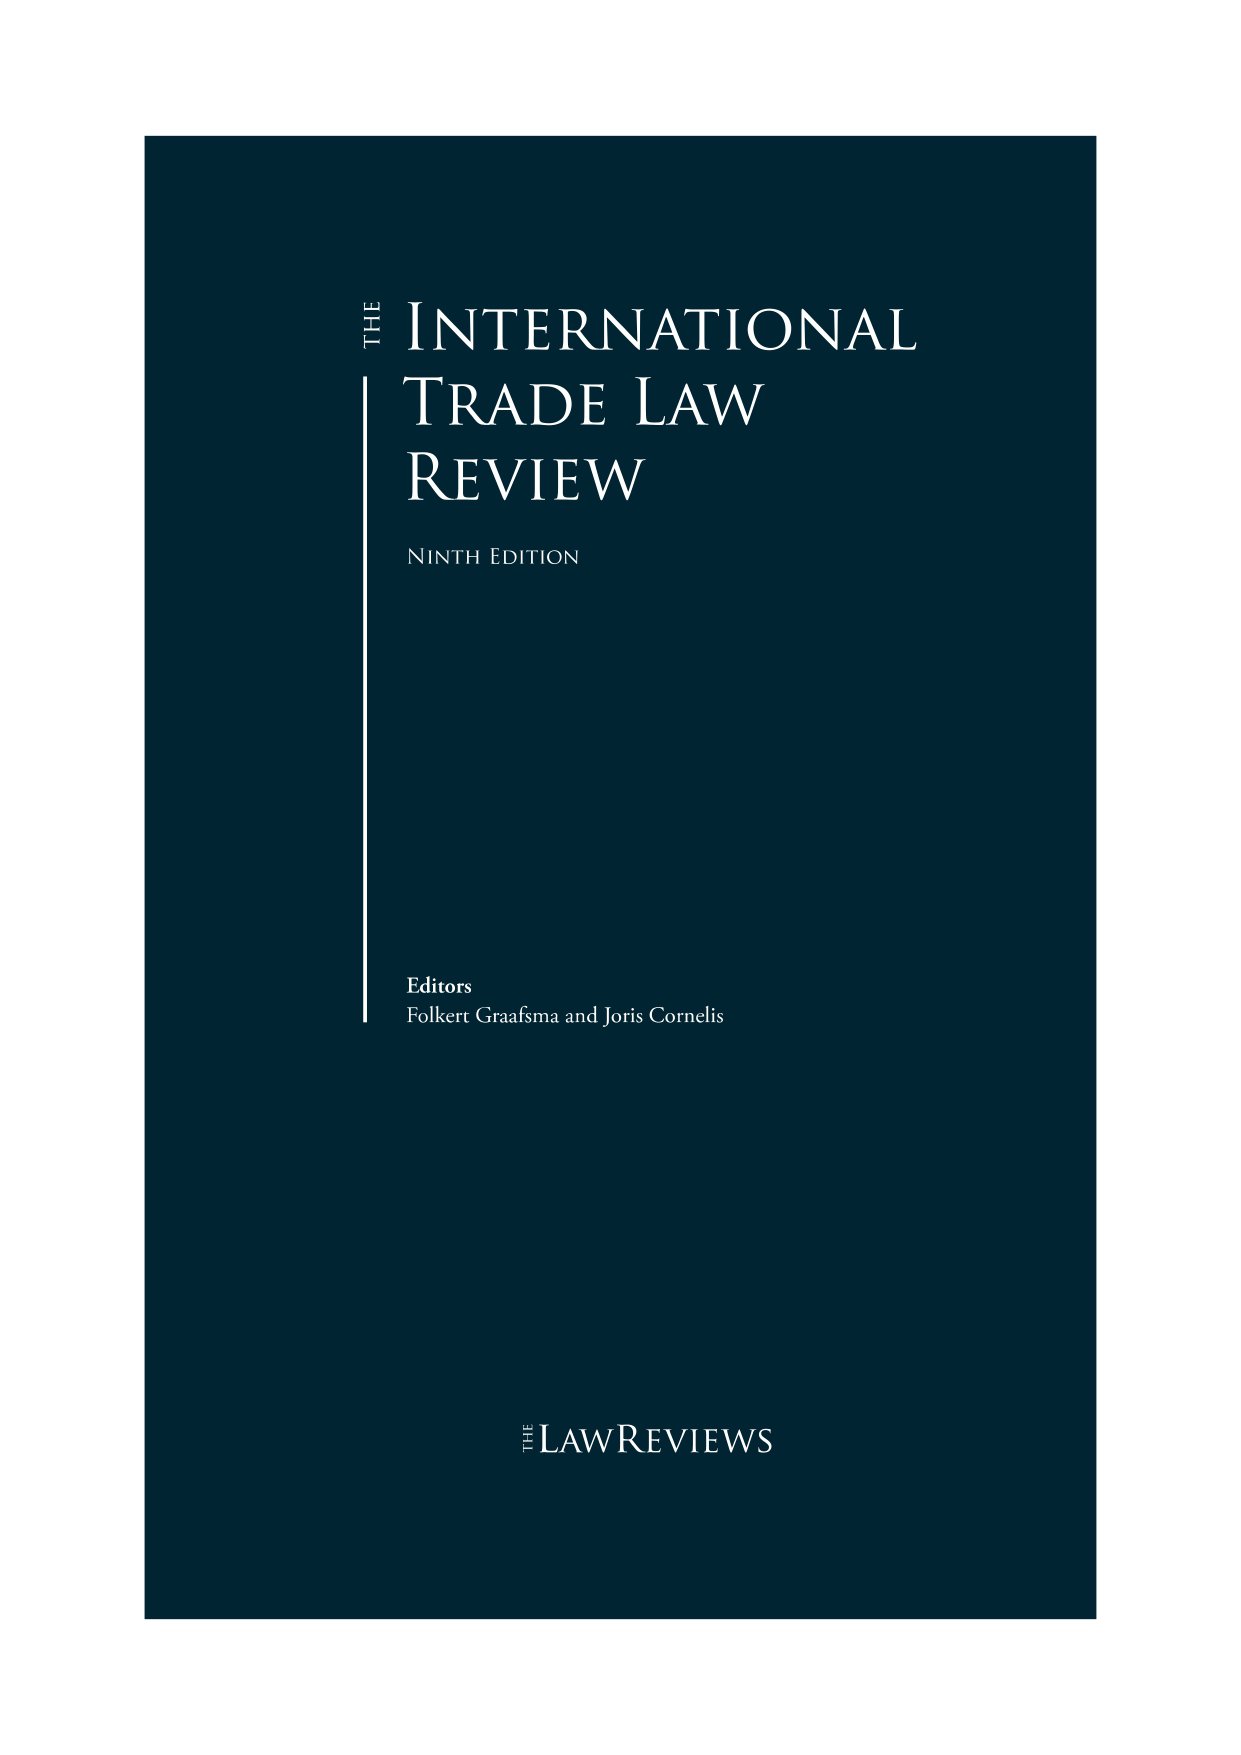 International Trade Law Review 9th Edition